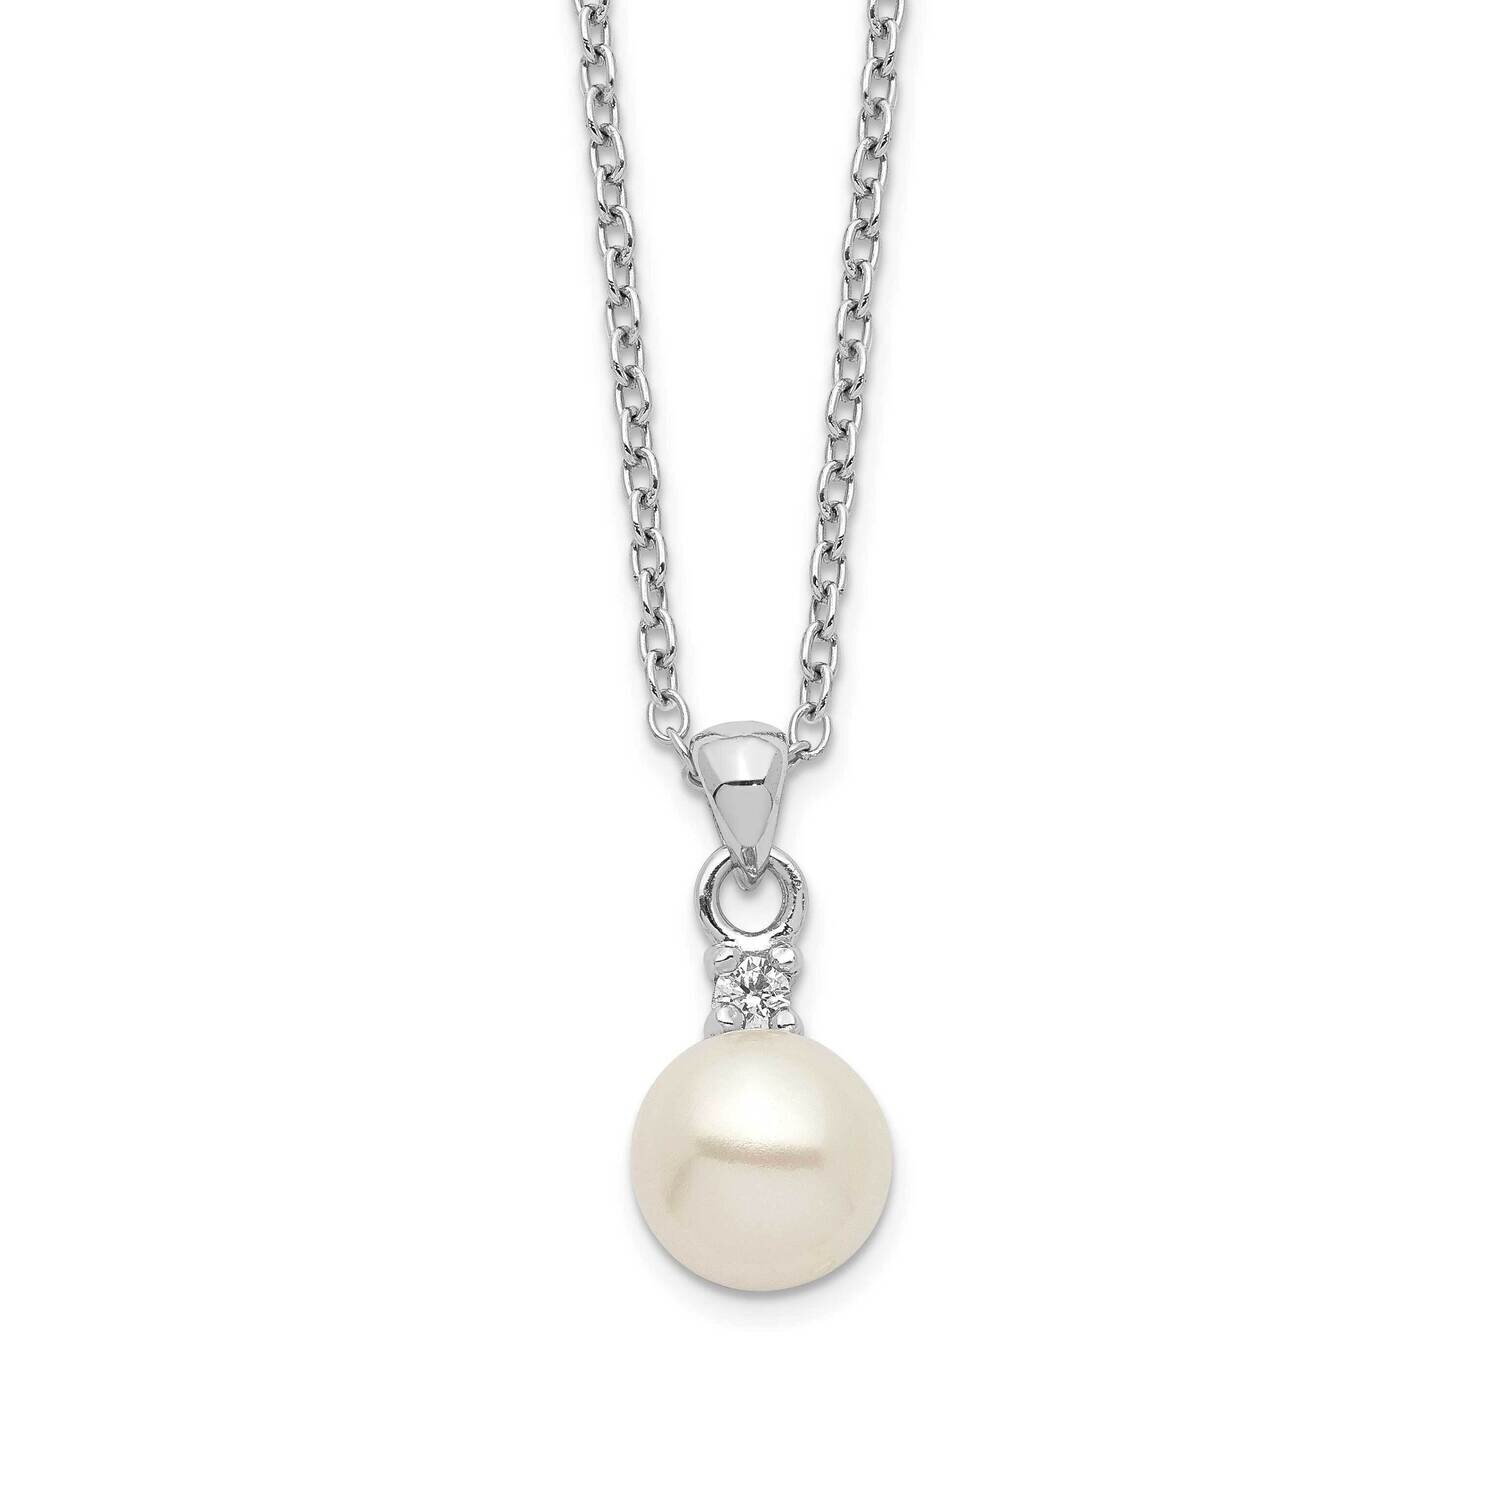 6-7mm White Button Fwc Pearl Cz Necklace Sterling Silver Rhodium-plated QH5504-17